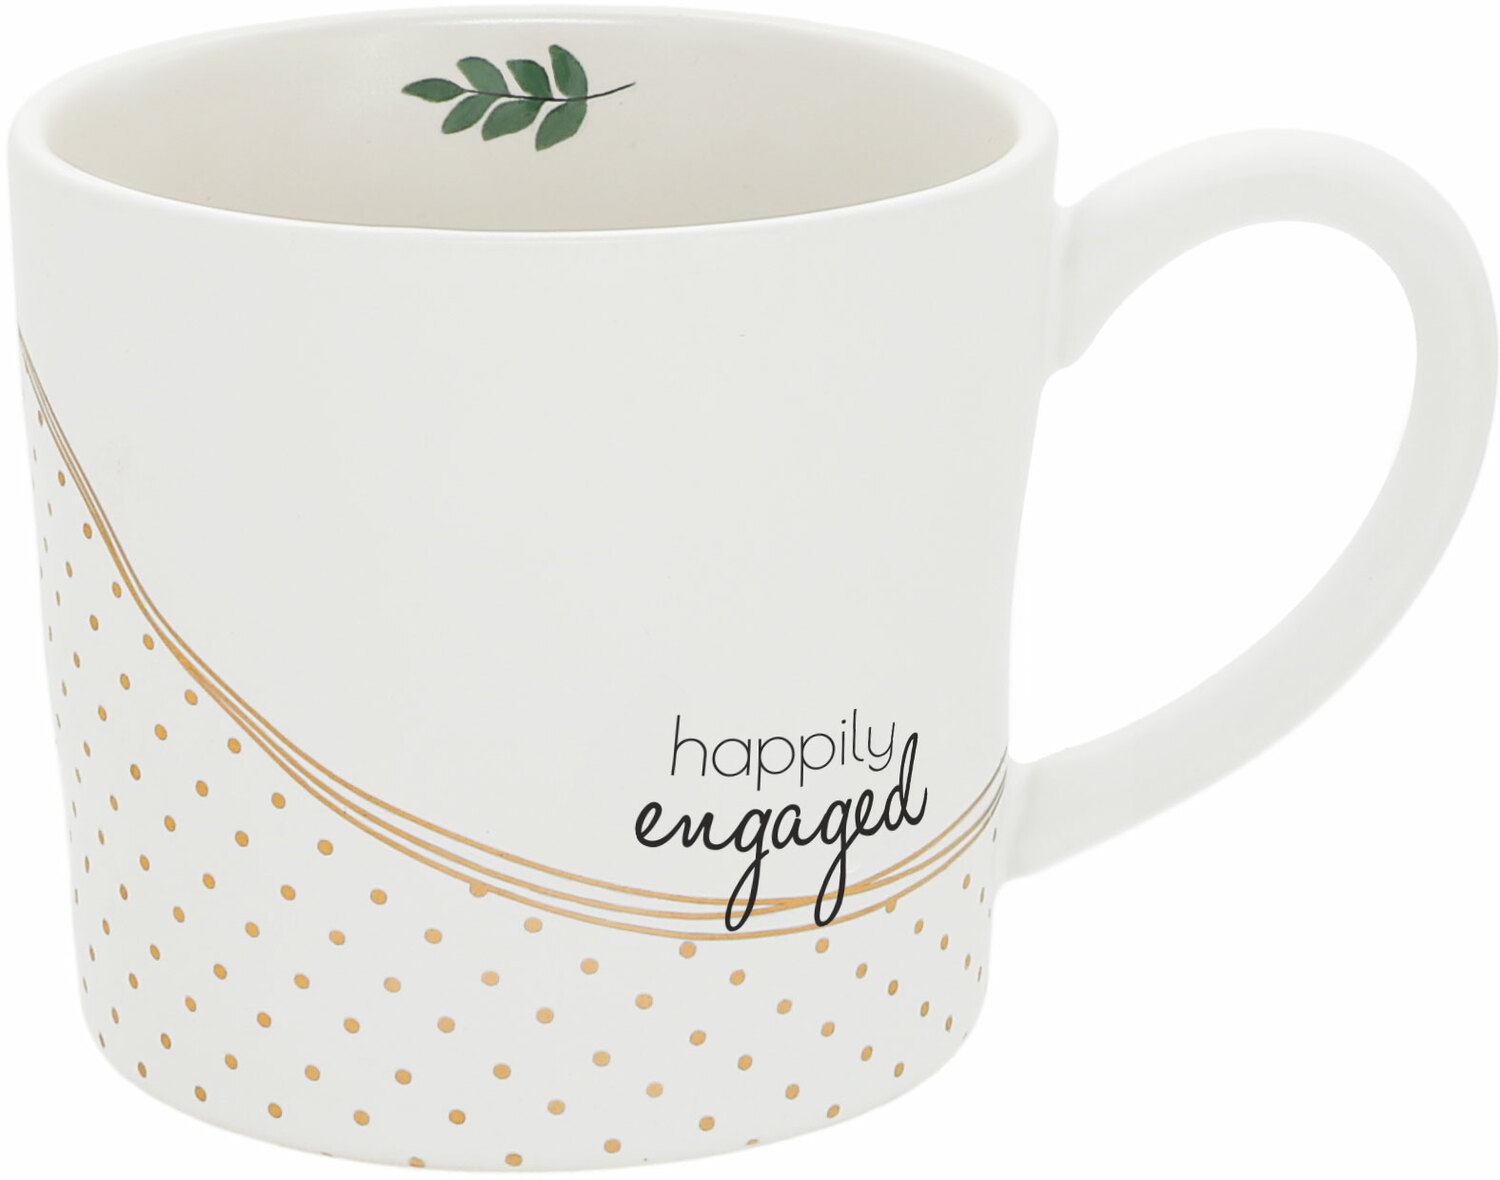 Happily Engaged by Love Grows - Happily Engaged - 15 oz Cup